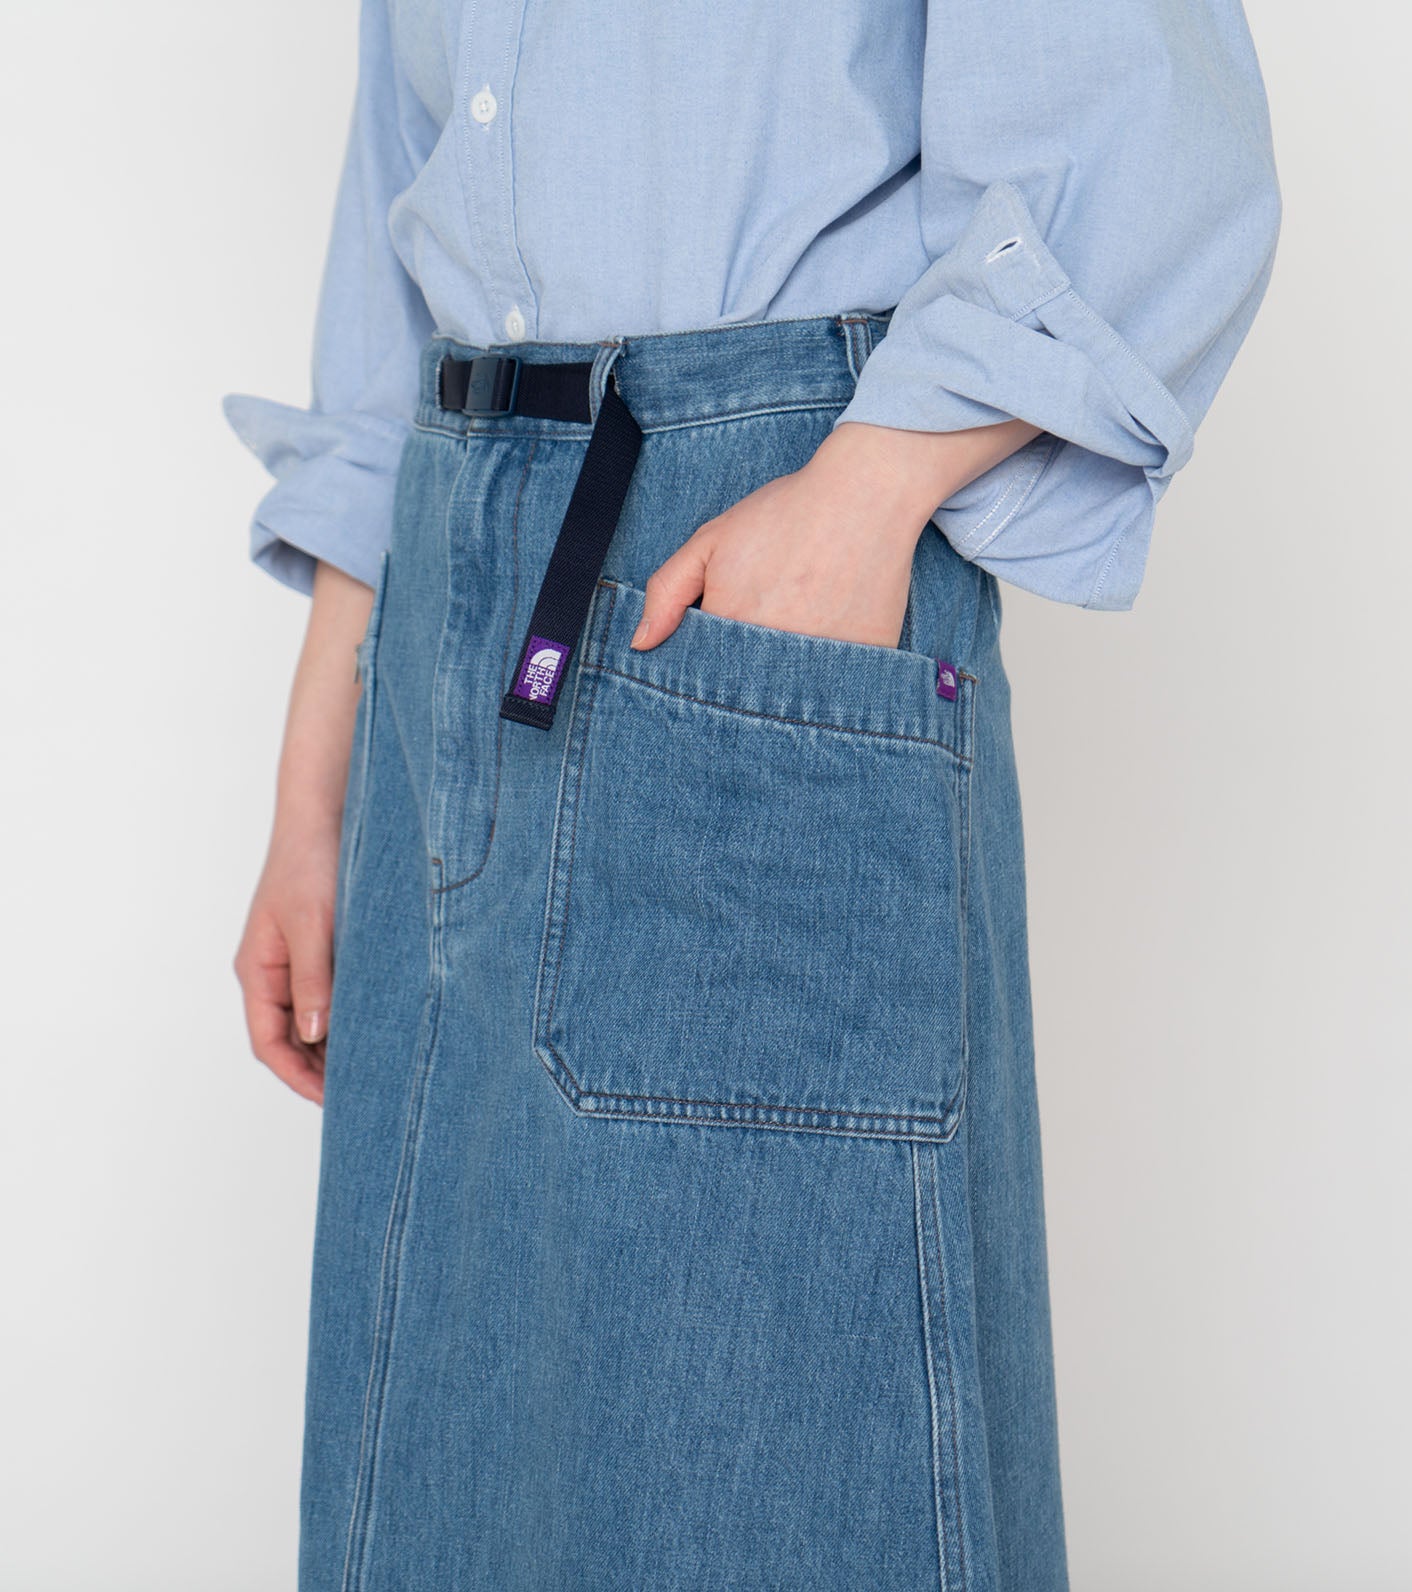 THE NORTH FACE PURPLE LABEL Denim Field Skirt – unexpected store